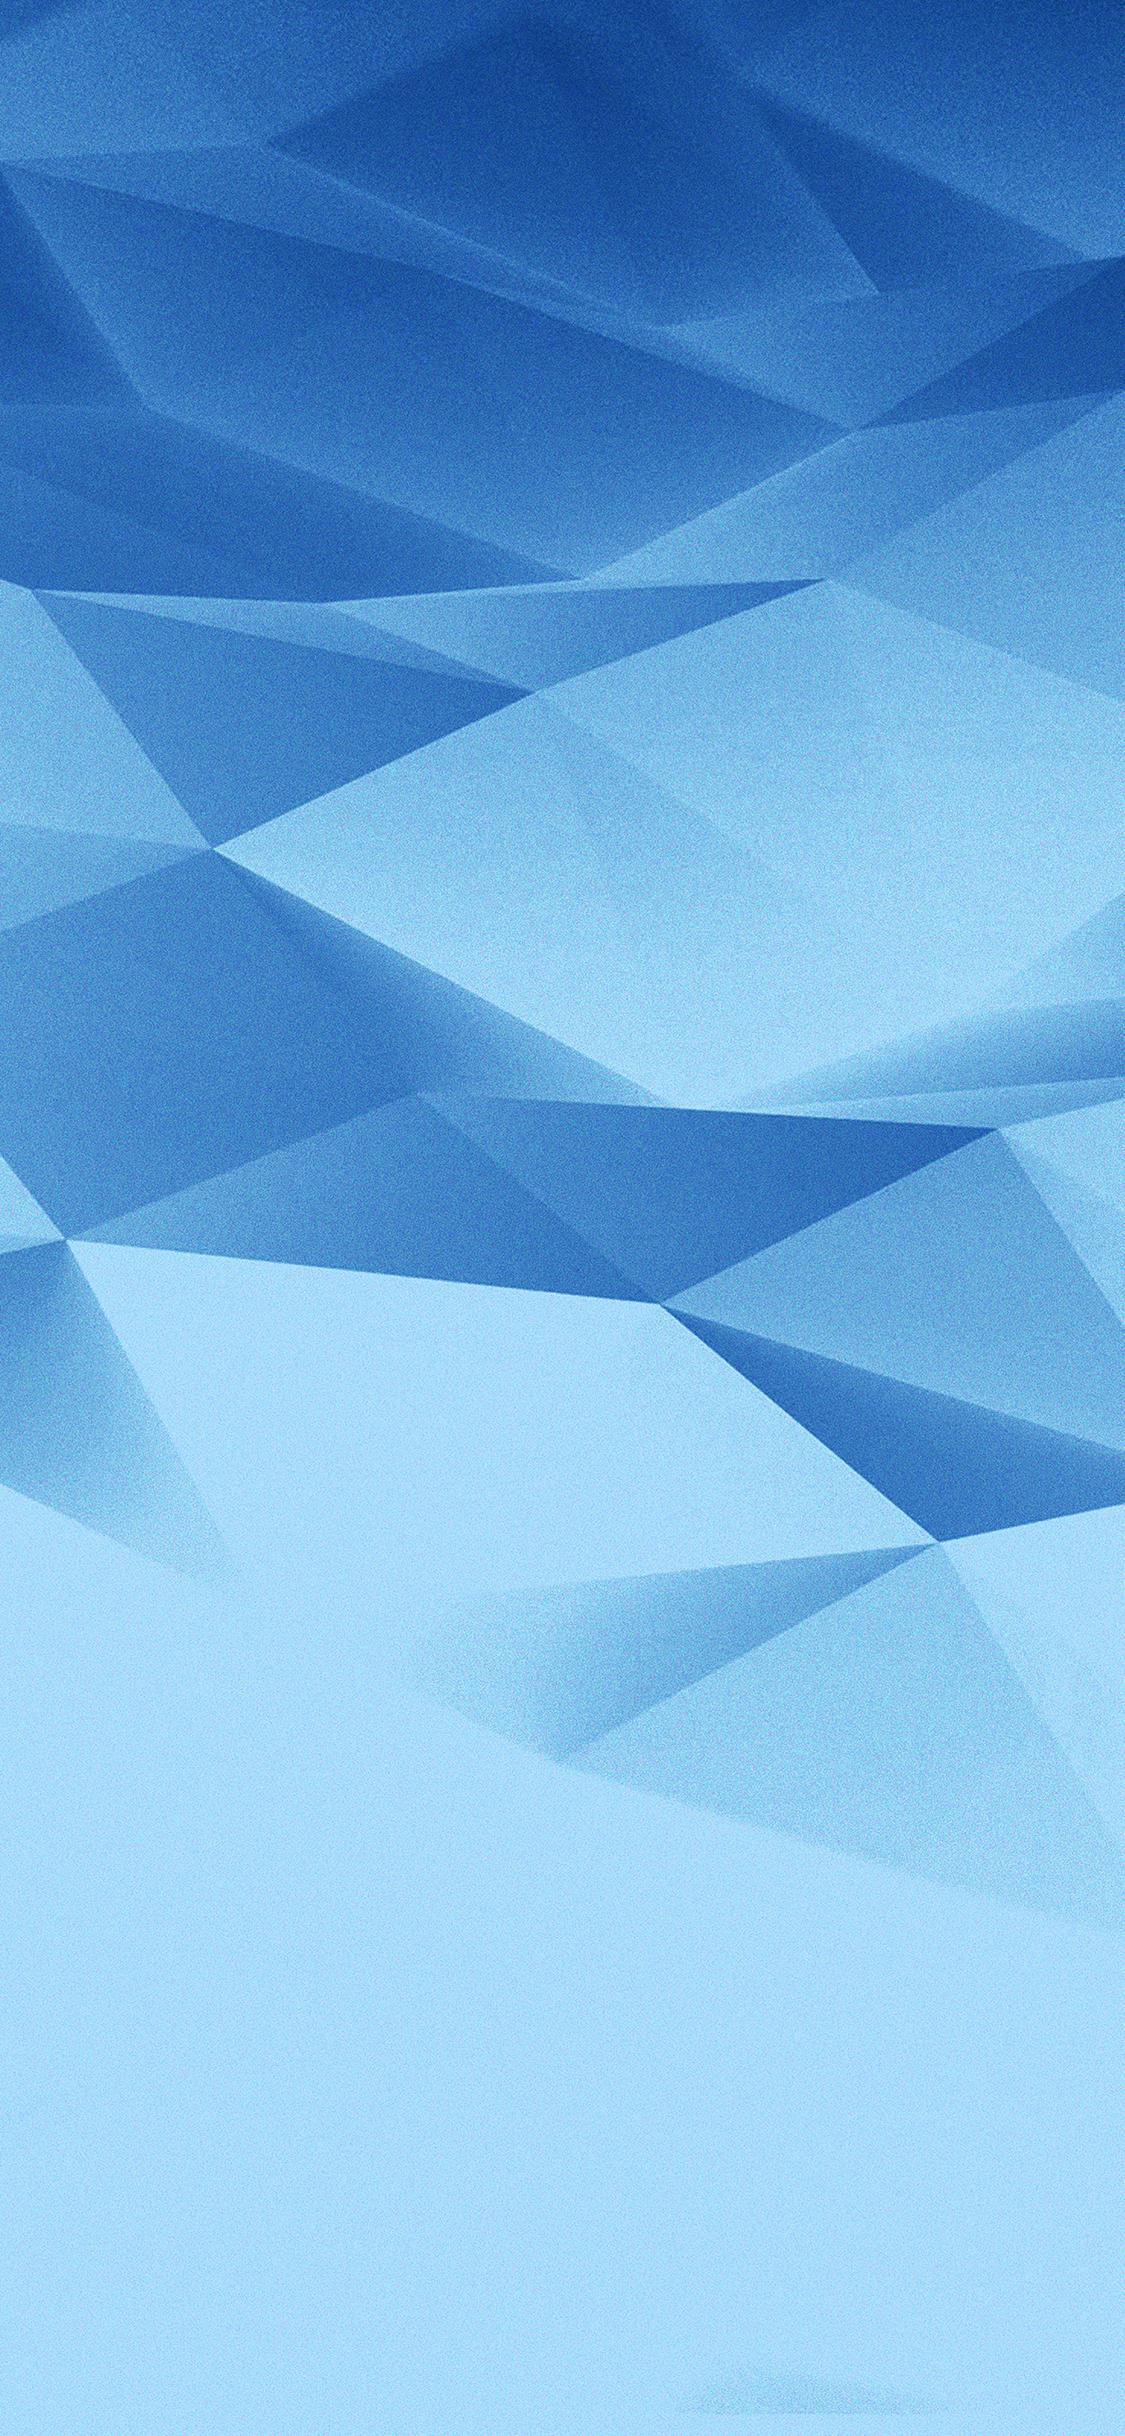 Light Blue Iphone Wallpapers